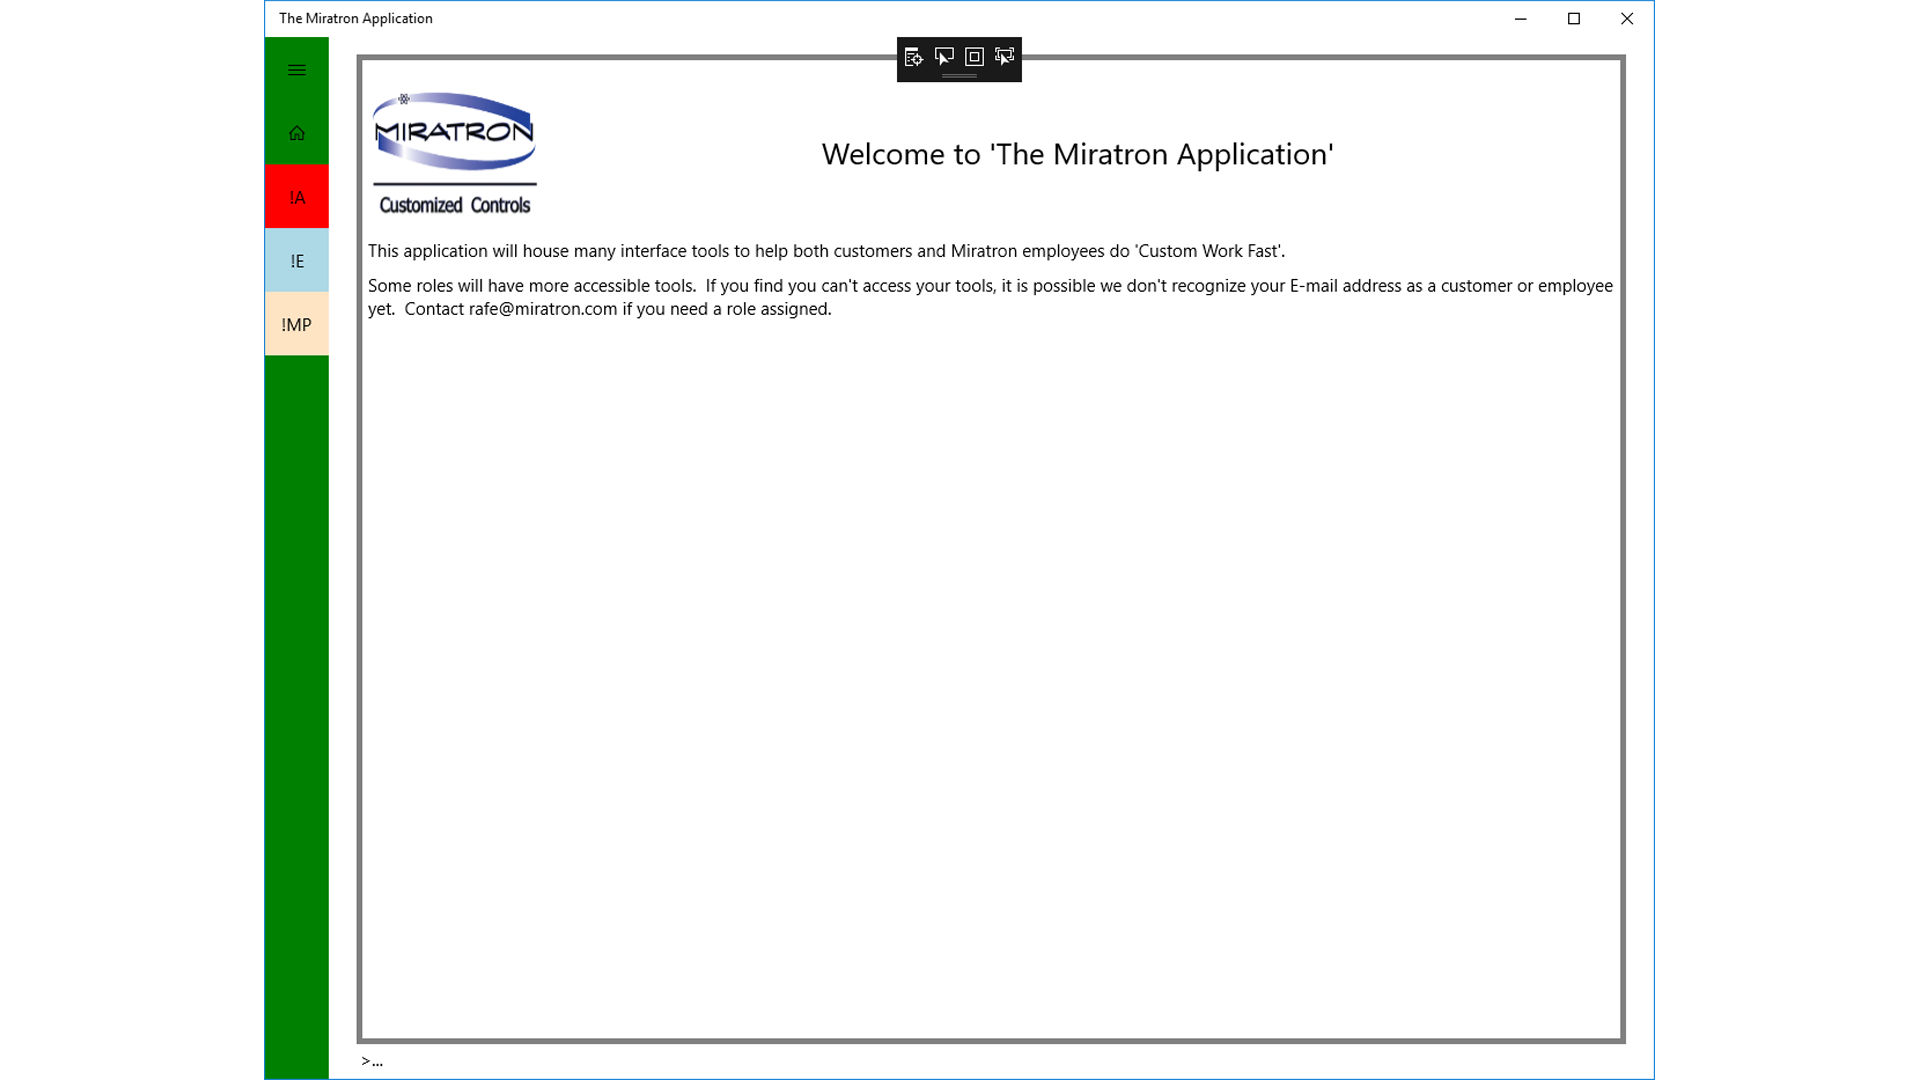 The Miratron Application